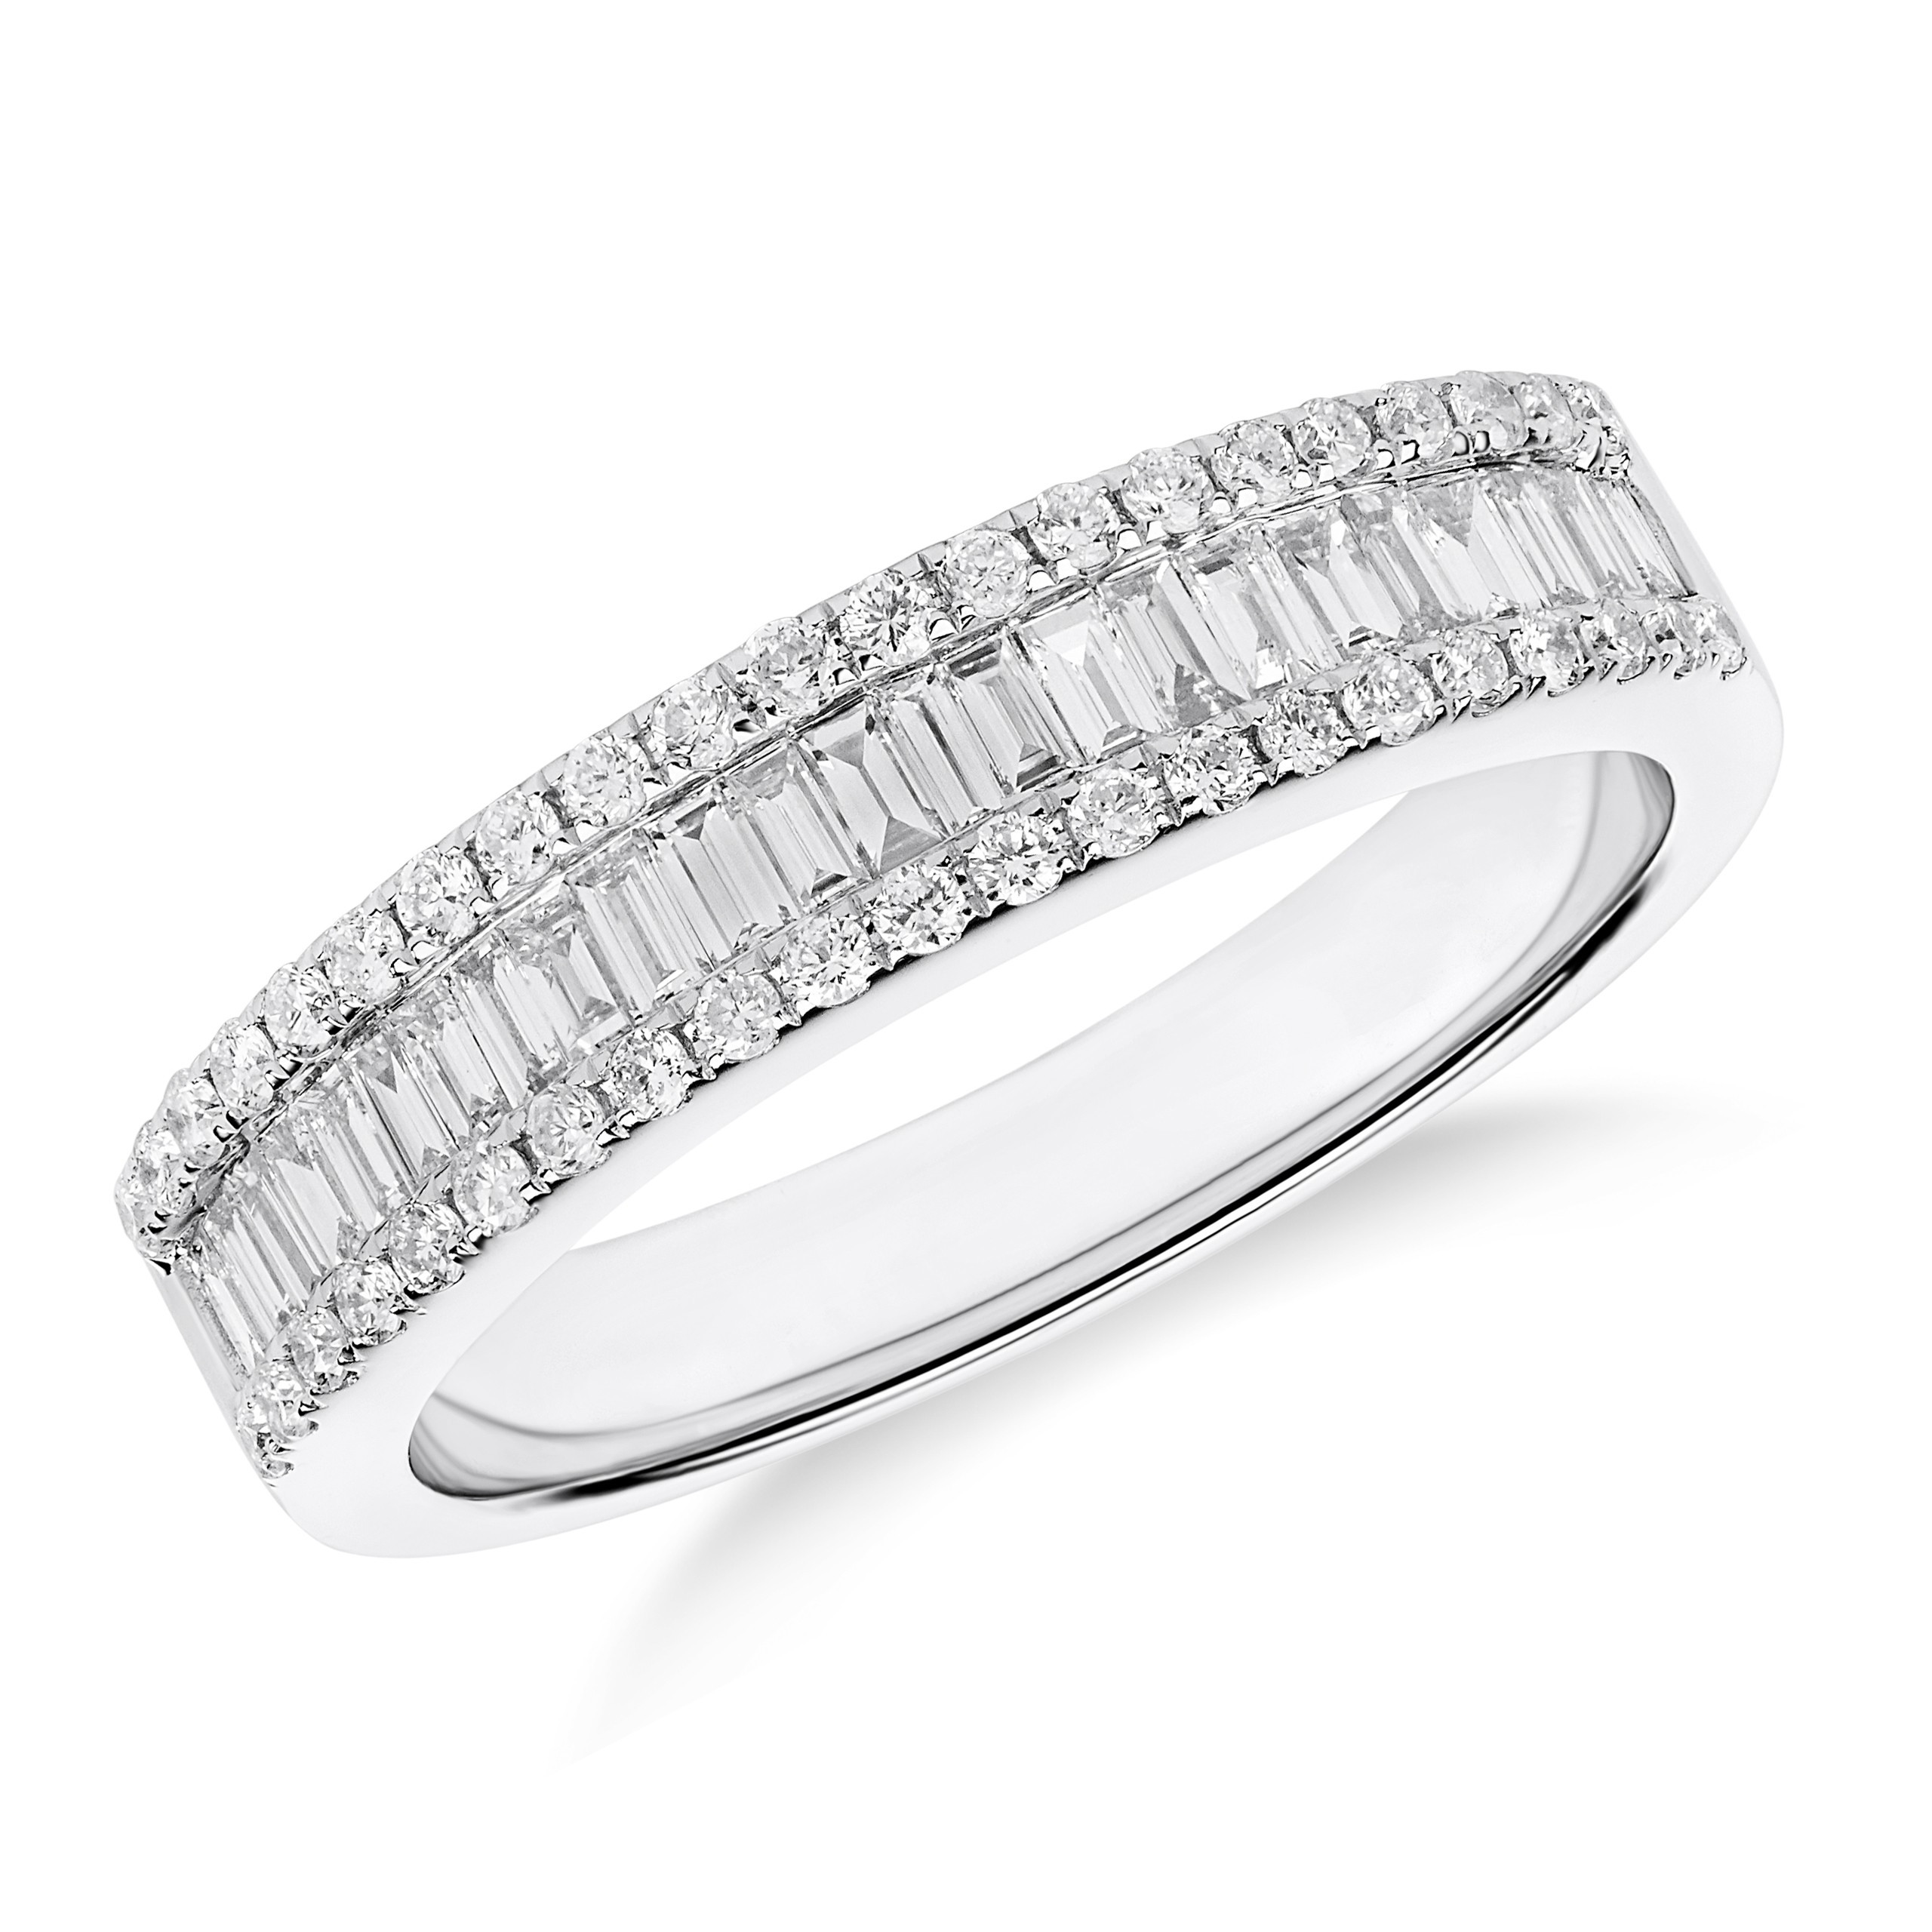 Round And Baguette Diamond Wedding Band
 Round and Baguette Diamond Wedding Ring in 18k White Gold